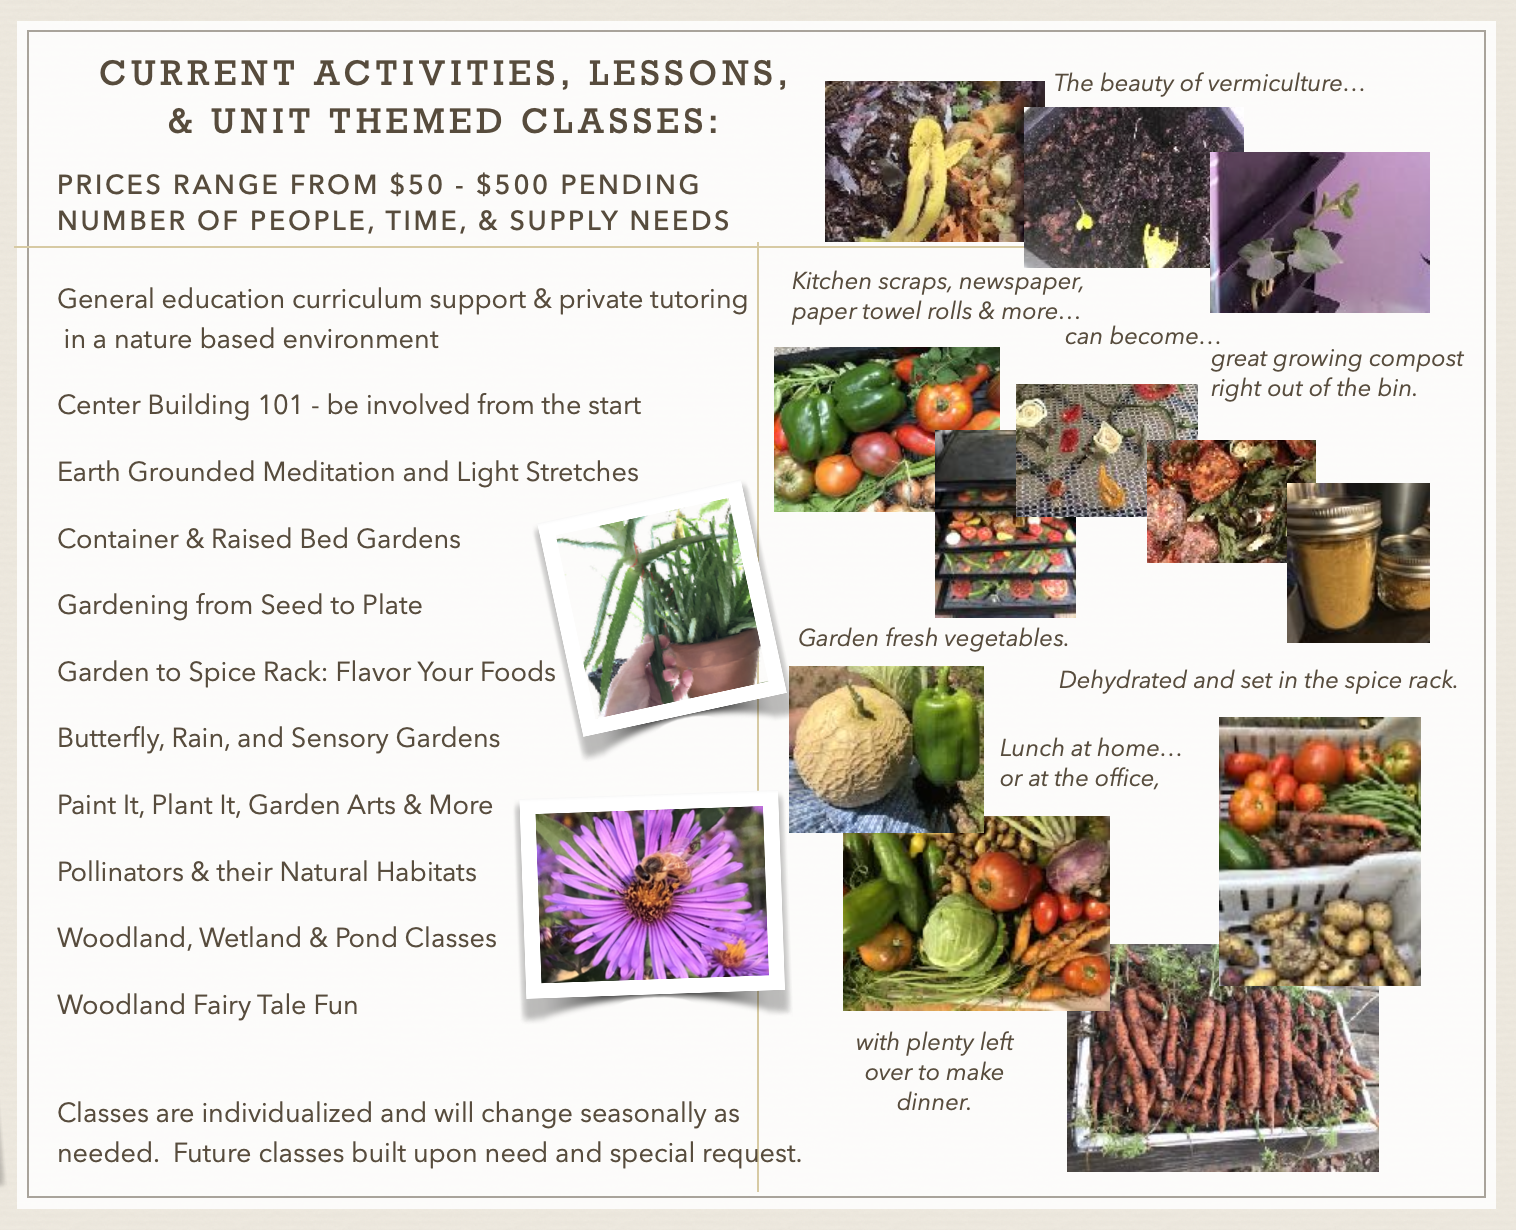 This image shows a list of sample classes ranging from $50 - $500 pending site and materials. There are a variety of small pictures of fresh garden vegetables, spices, and vermiculture included. Please just call Brook and she'll be happy to give you a better description of each one.